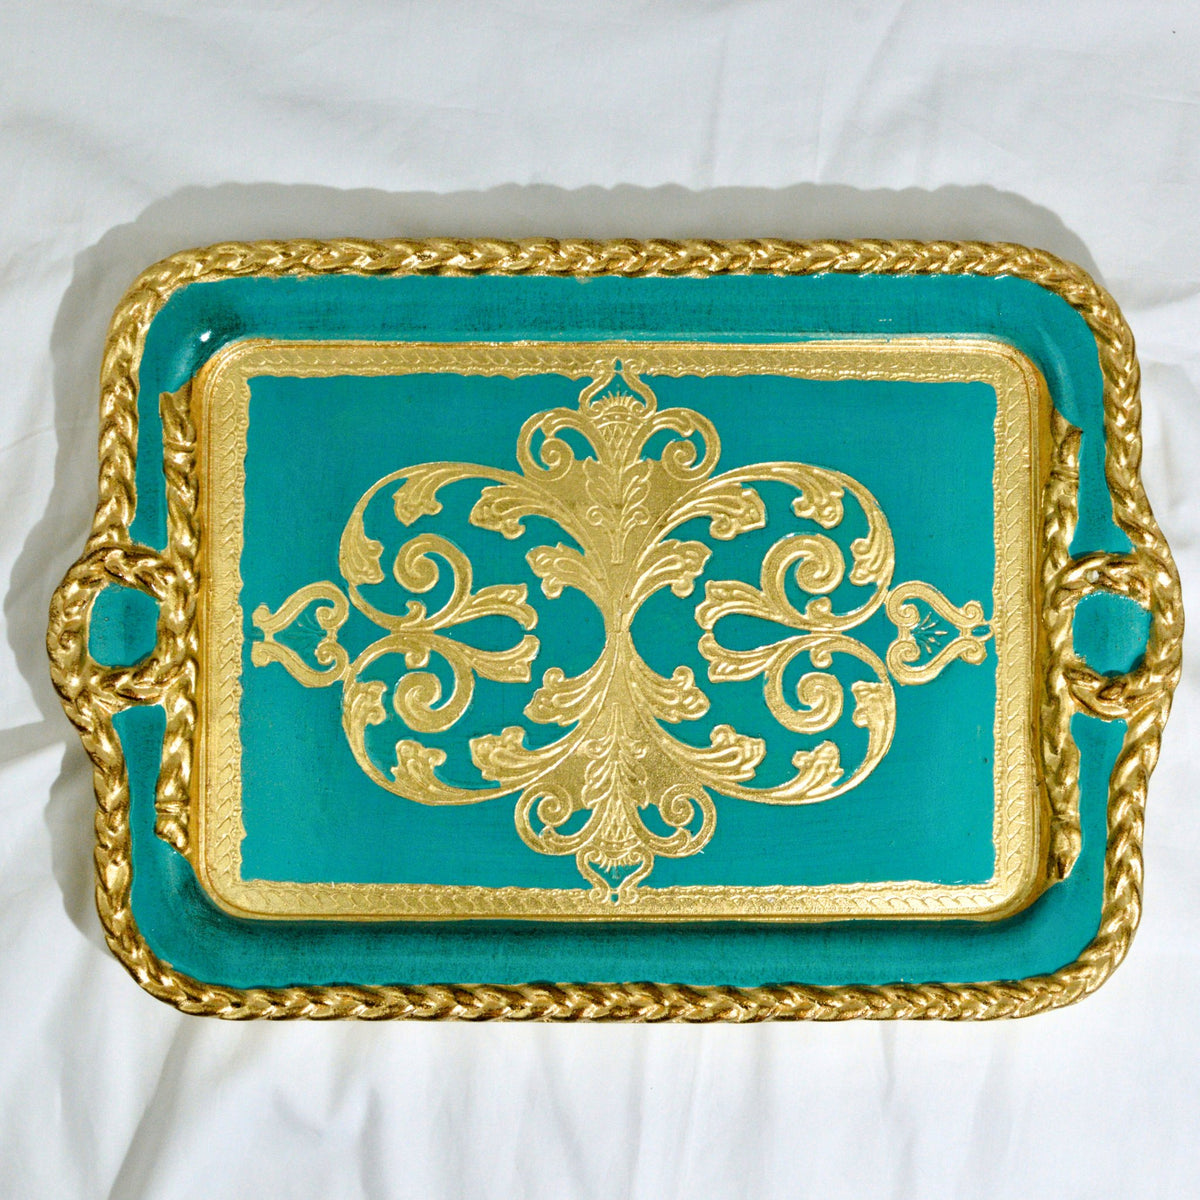 Florentine Carved Wood Tray, Gilded, Gold Rectangle, Made in Italy - My Italian Decor